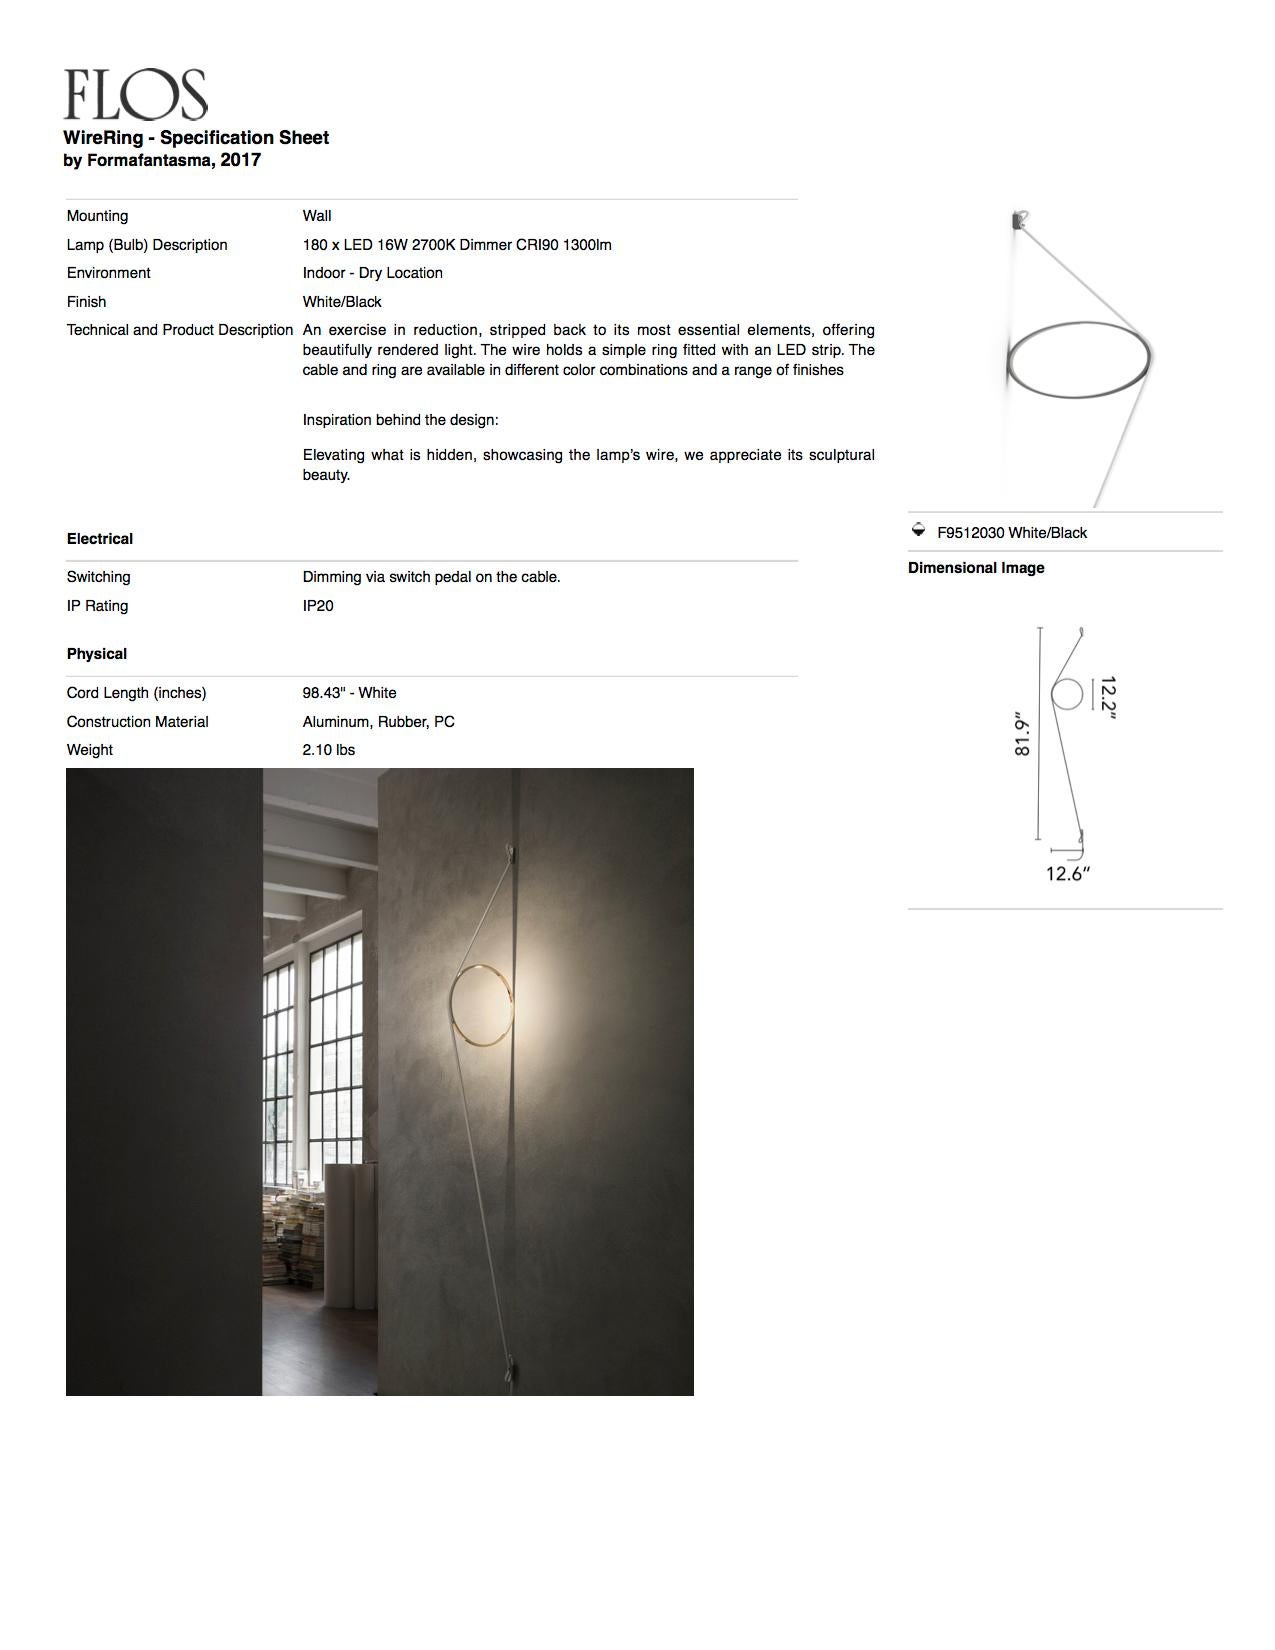 Aluminum FLOS Wirering Wall Light in White and Pink by Formafantasma